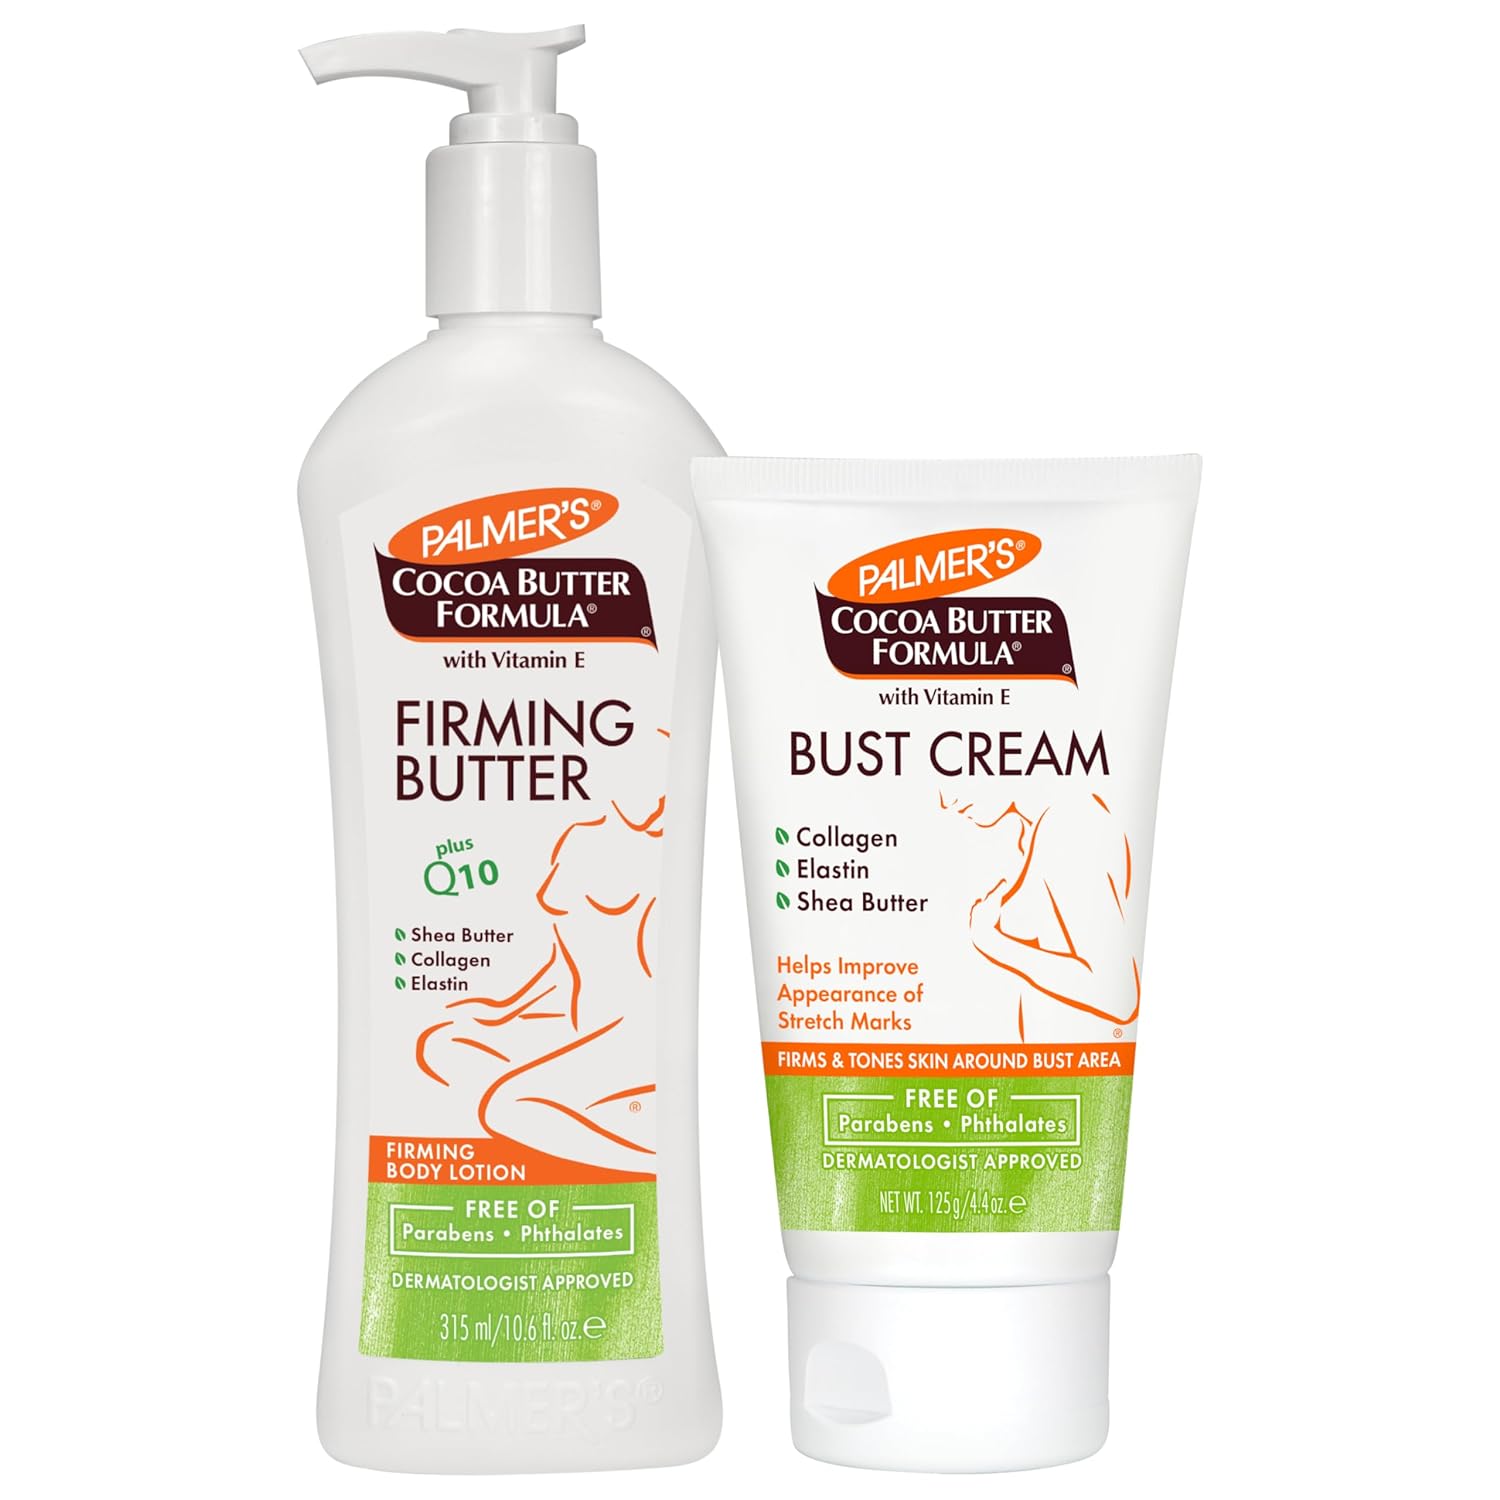 Palmer's Firming Butter & Bust Cream bundle (Pack of 2) : Beauty & Personal Care